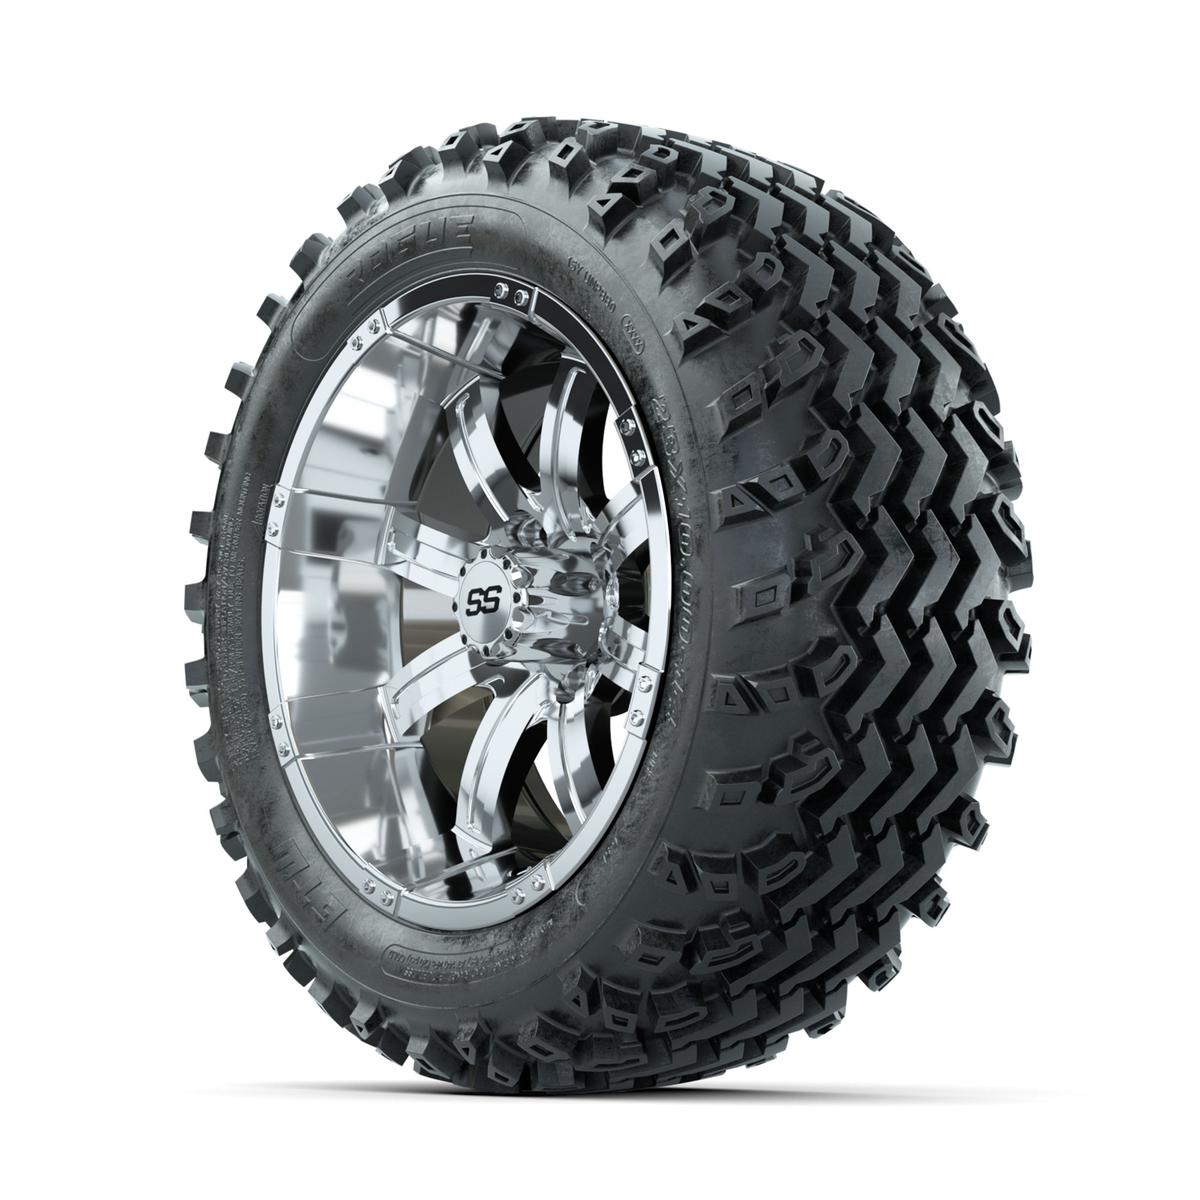 GTW Tempest Chrome 14 in Wheels with 23x10.00-14 Rogue All Terrain Tires – Full Set